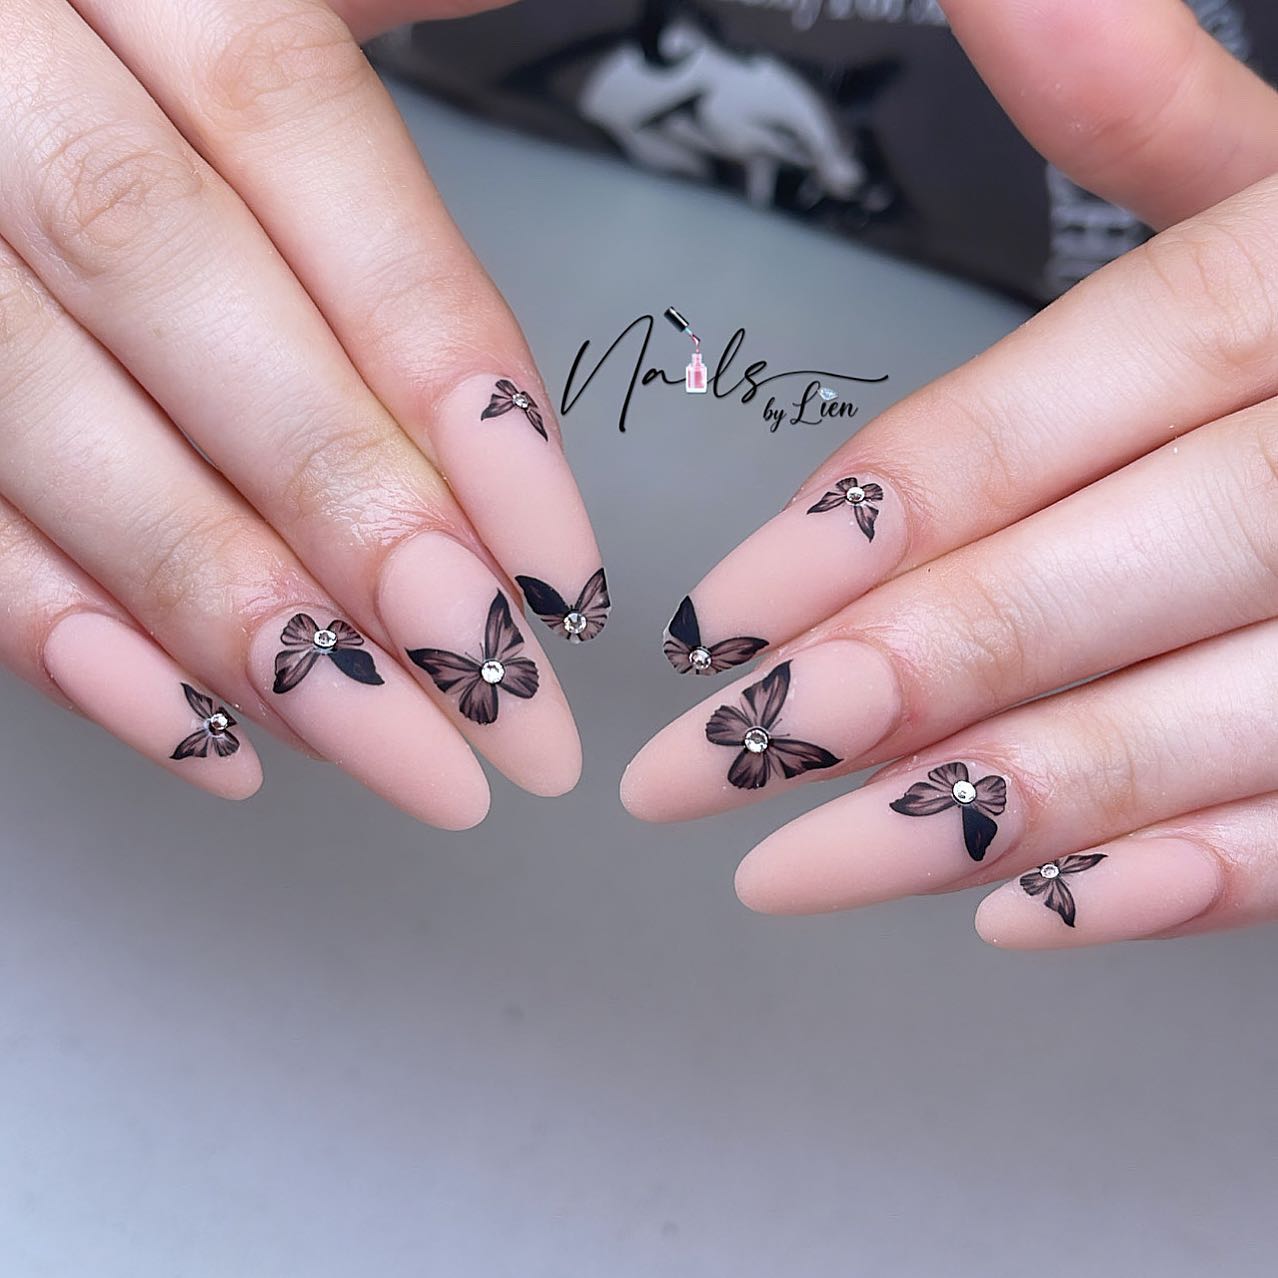  Matte nails are one the coolest things and it is an easy way to get a perfect vibe. With nude matte nails and black butterflies, you will rock!